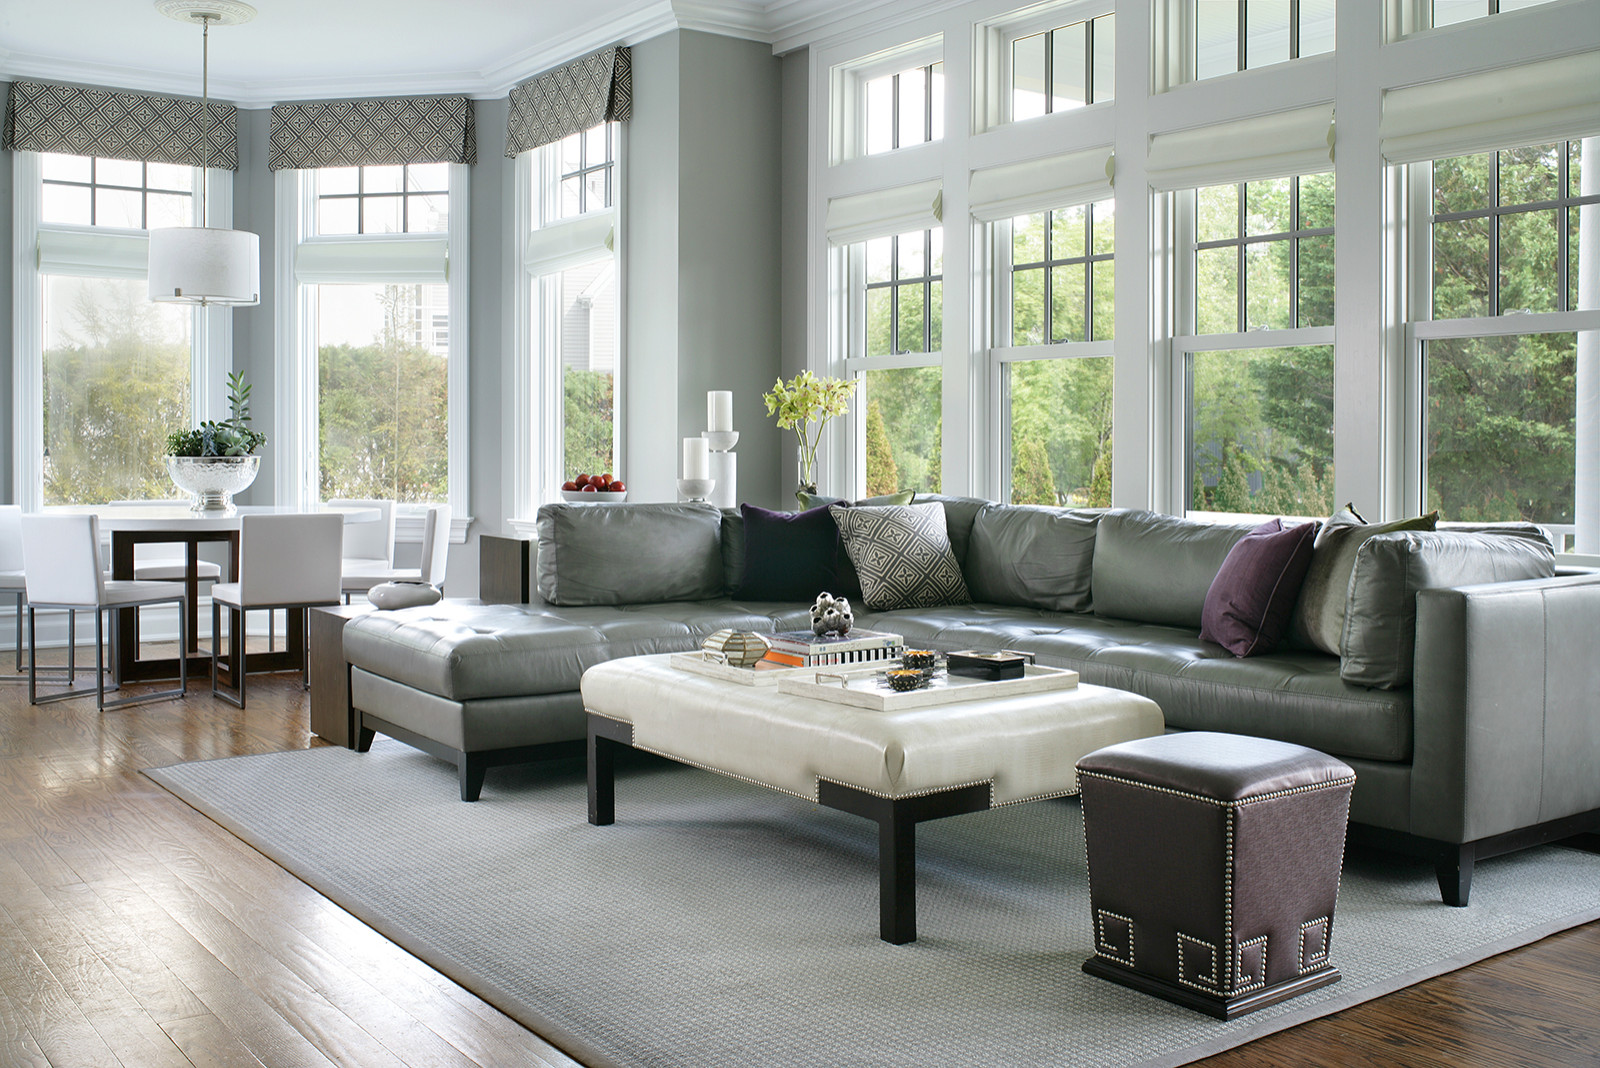 Leather Sectional Houzz, Living Room With Leather Sectional